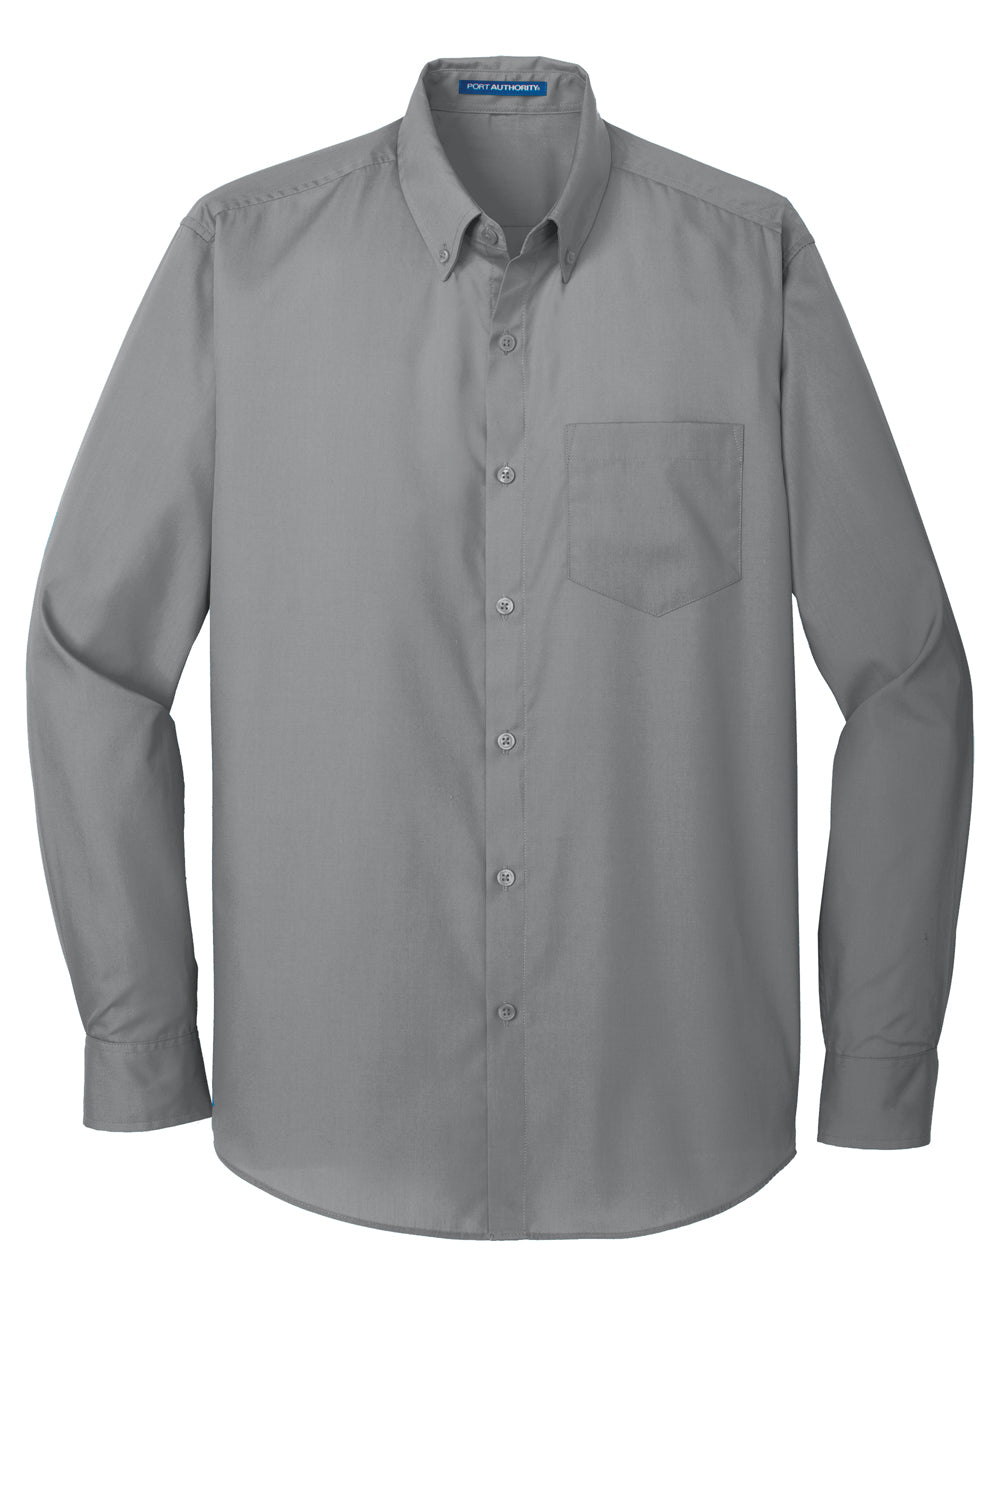 Port Authority W100/TW100 Carefree Stain Resistant Long Sleeve Button Down Shirt w/ Pocket Gusty Grey Flat Front